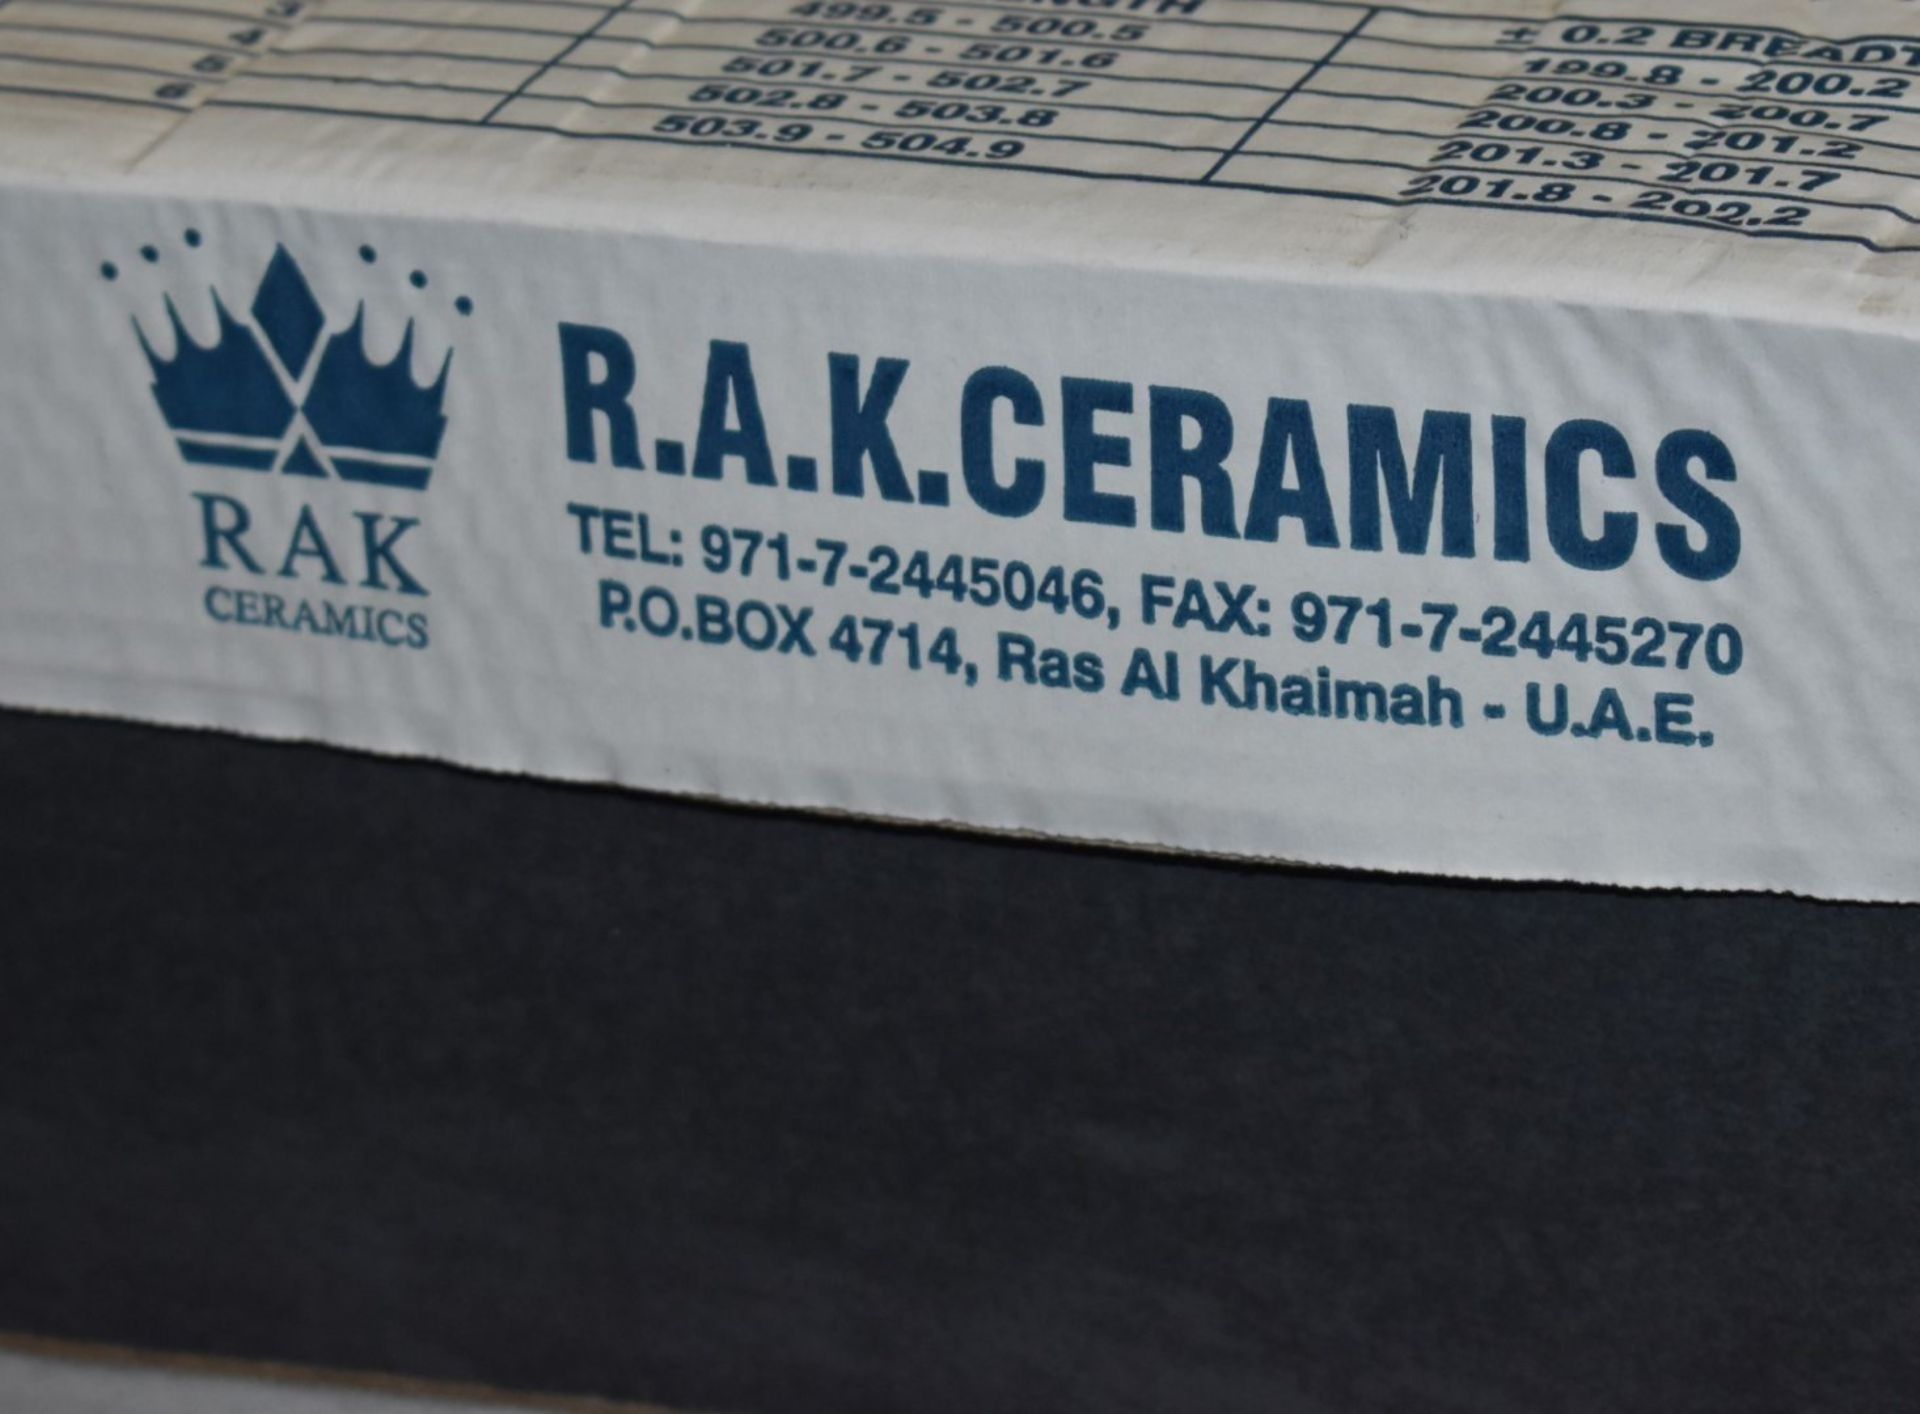 18 x Boxes of RAK Porcelain Floor or Wall Tiles - Dolomite Black - 20 x 50 cm Tiles Covering a Total - Image 3 of 9